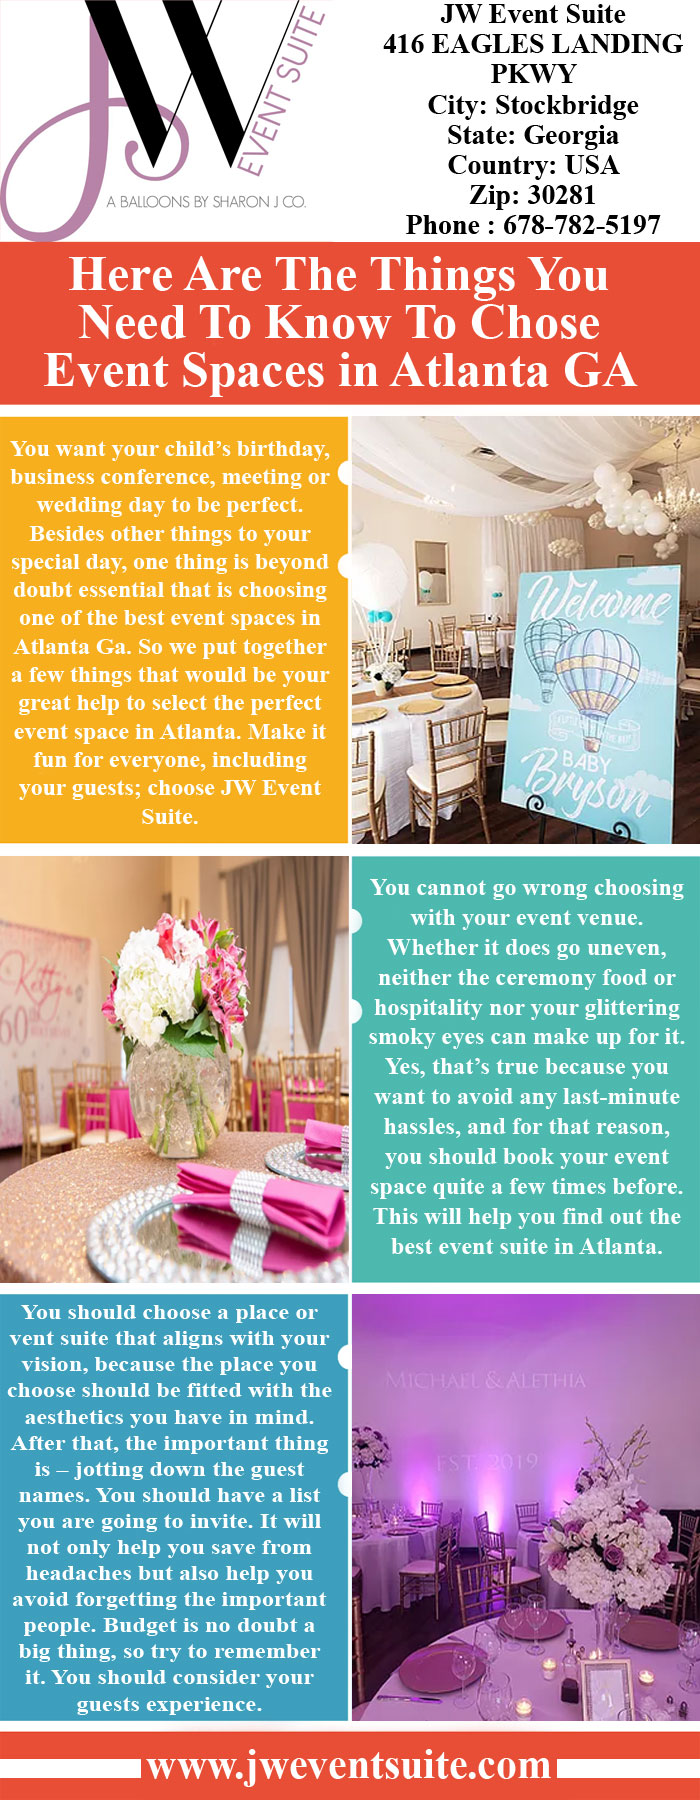 Here Are The Things You Need To Know To Chose Event Spaces in Atlanta GA.jpg  by Jweventsuite